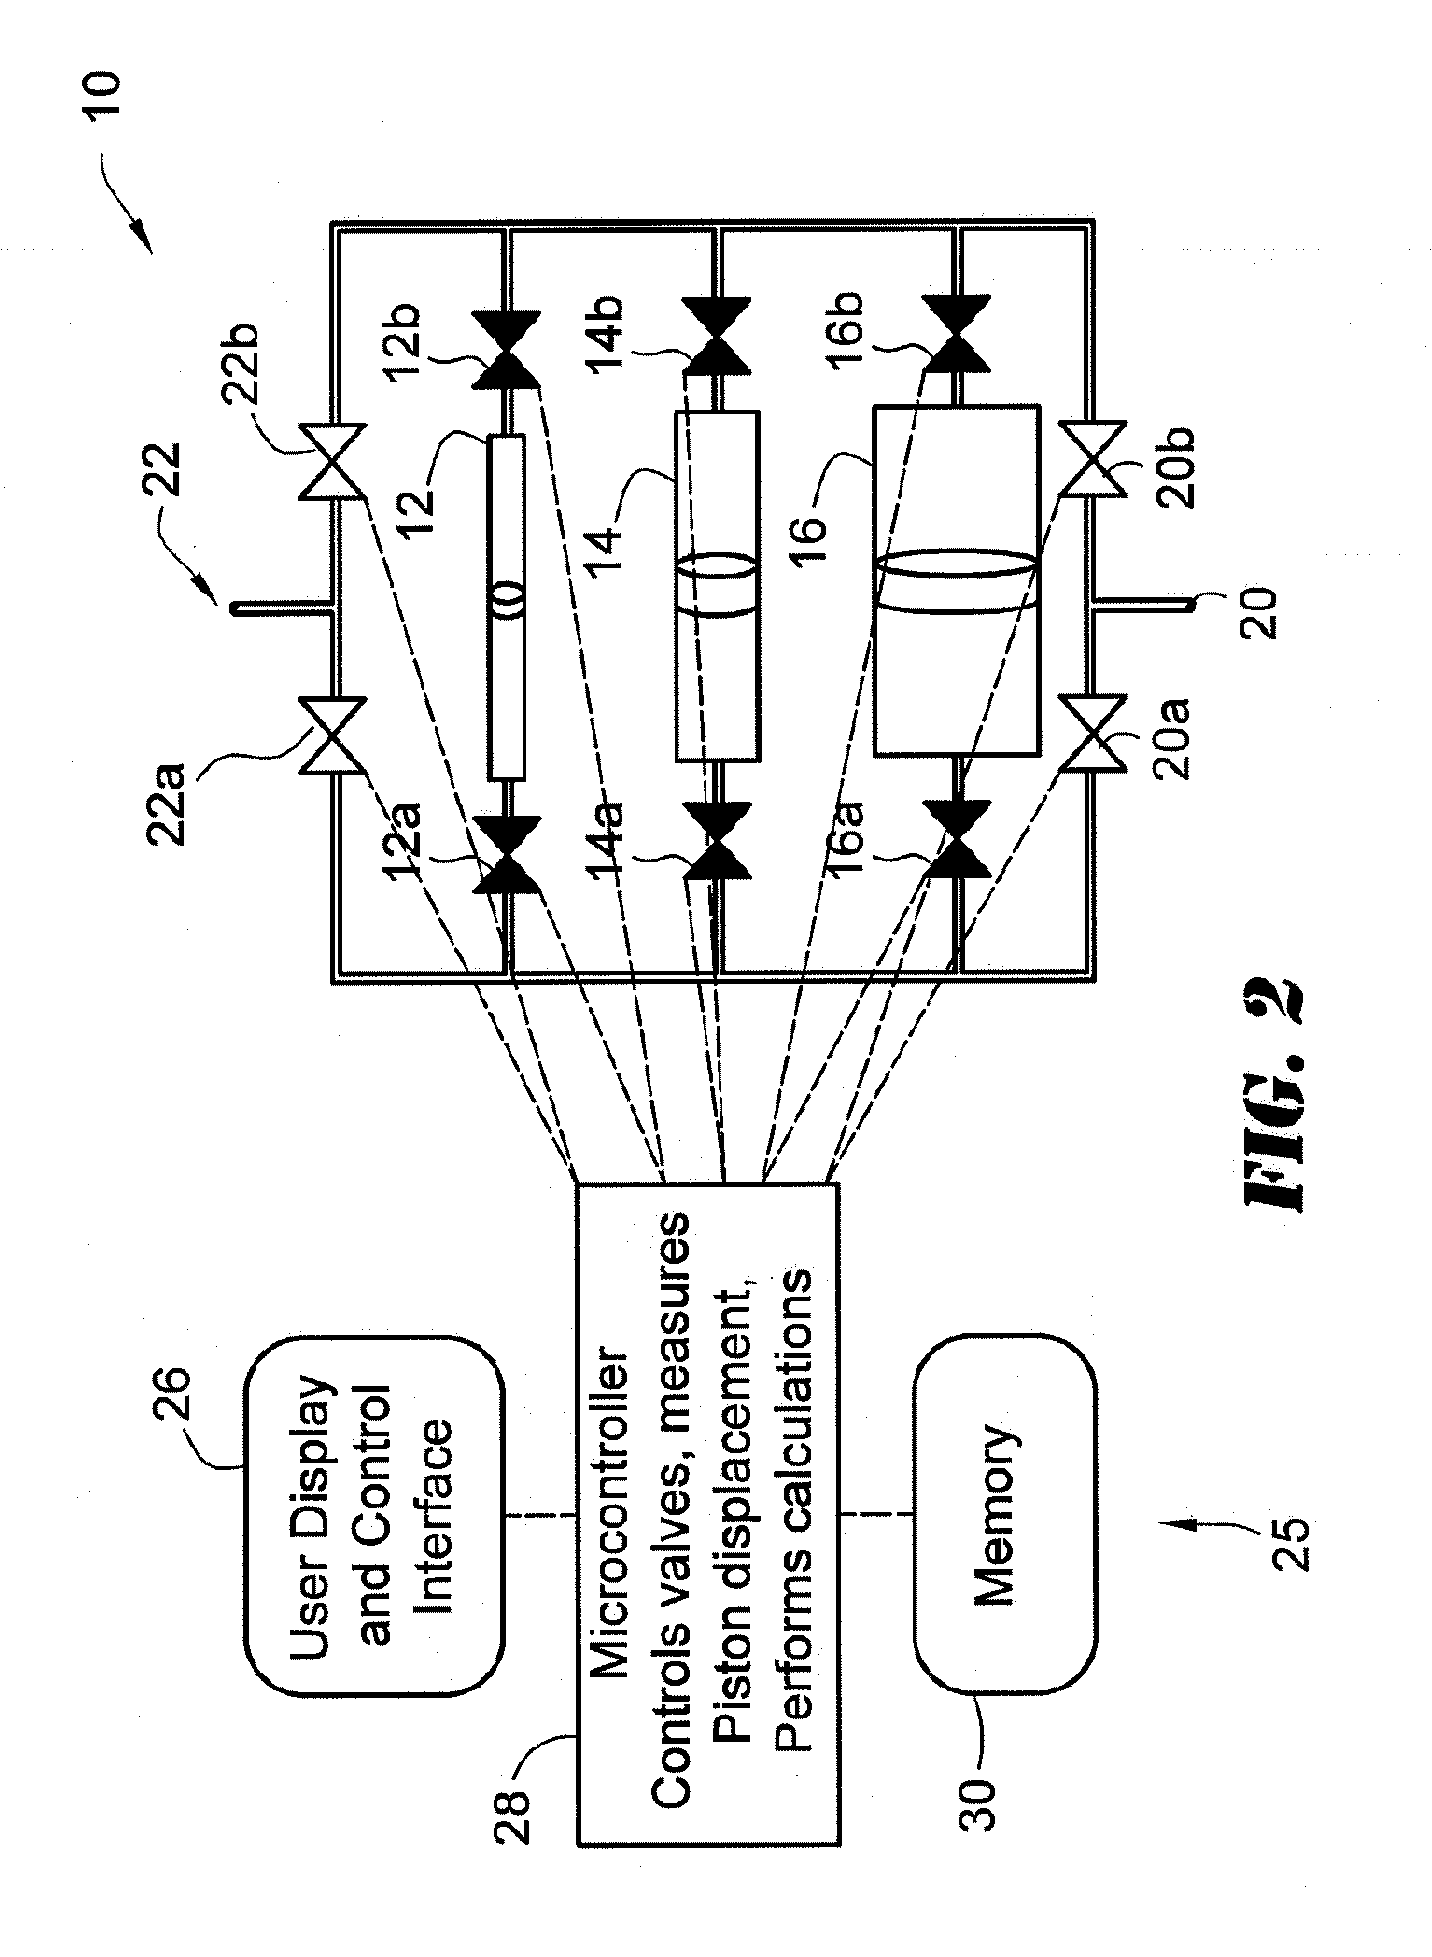 Volumetric Gas Flow Meter With Automatic Compressibility Factor Correction